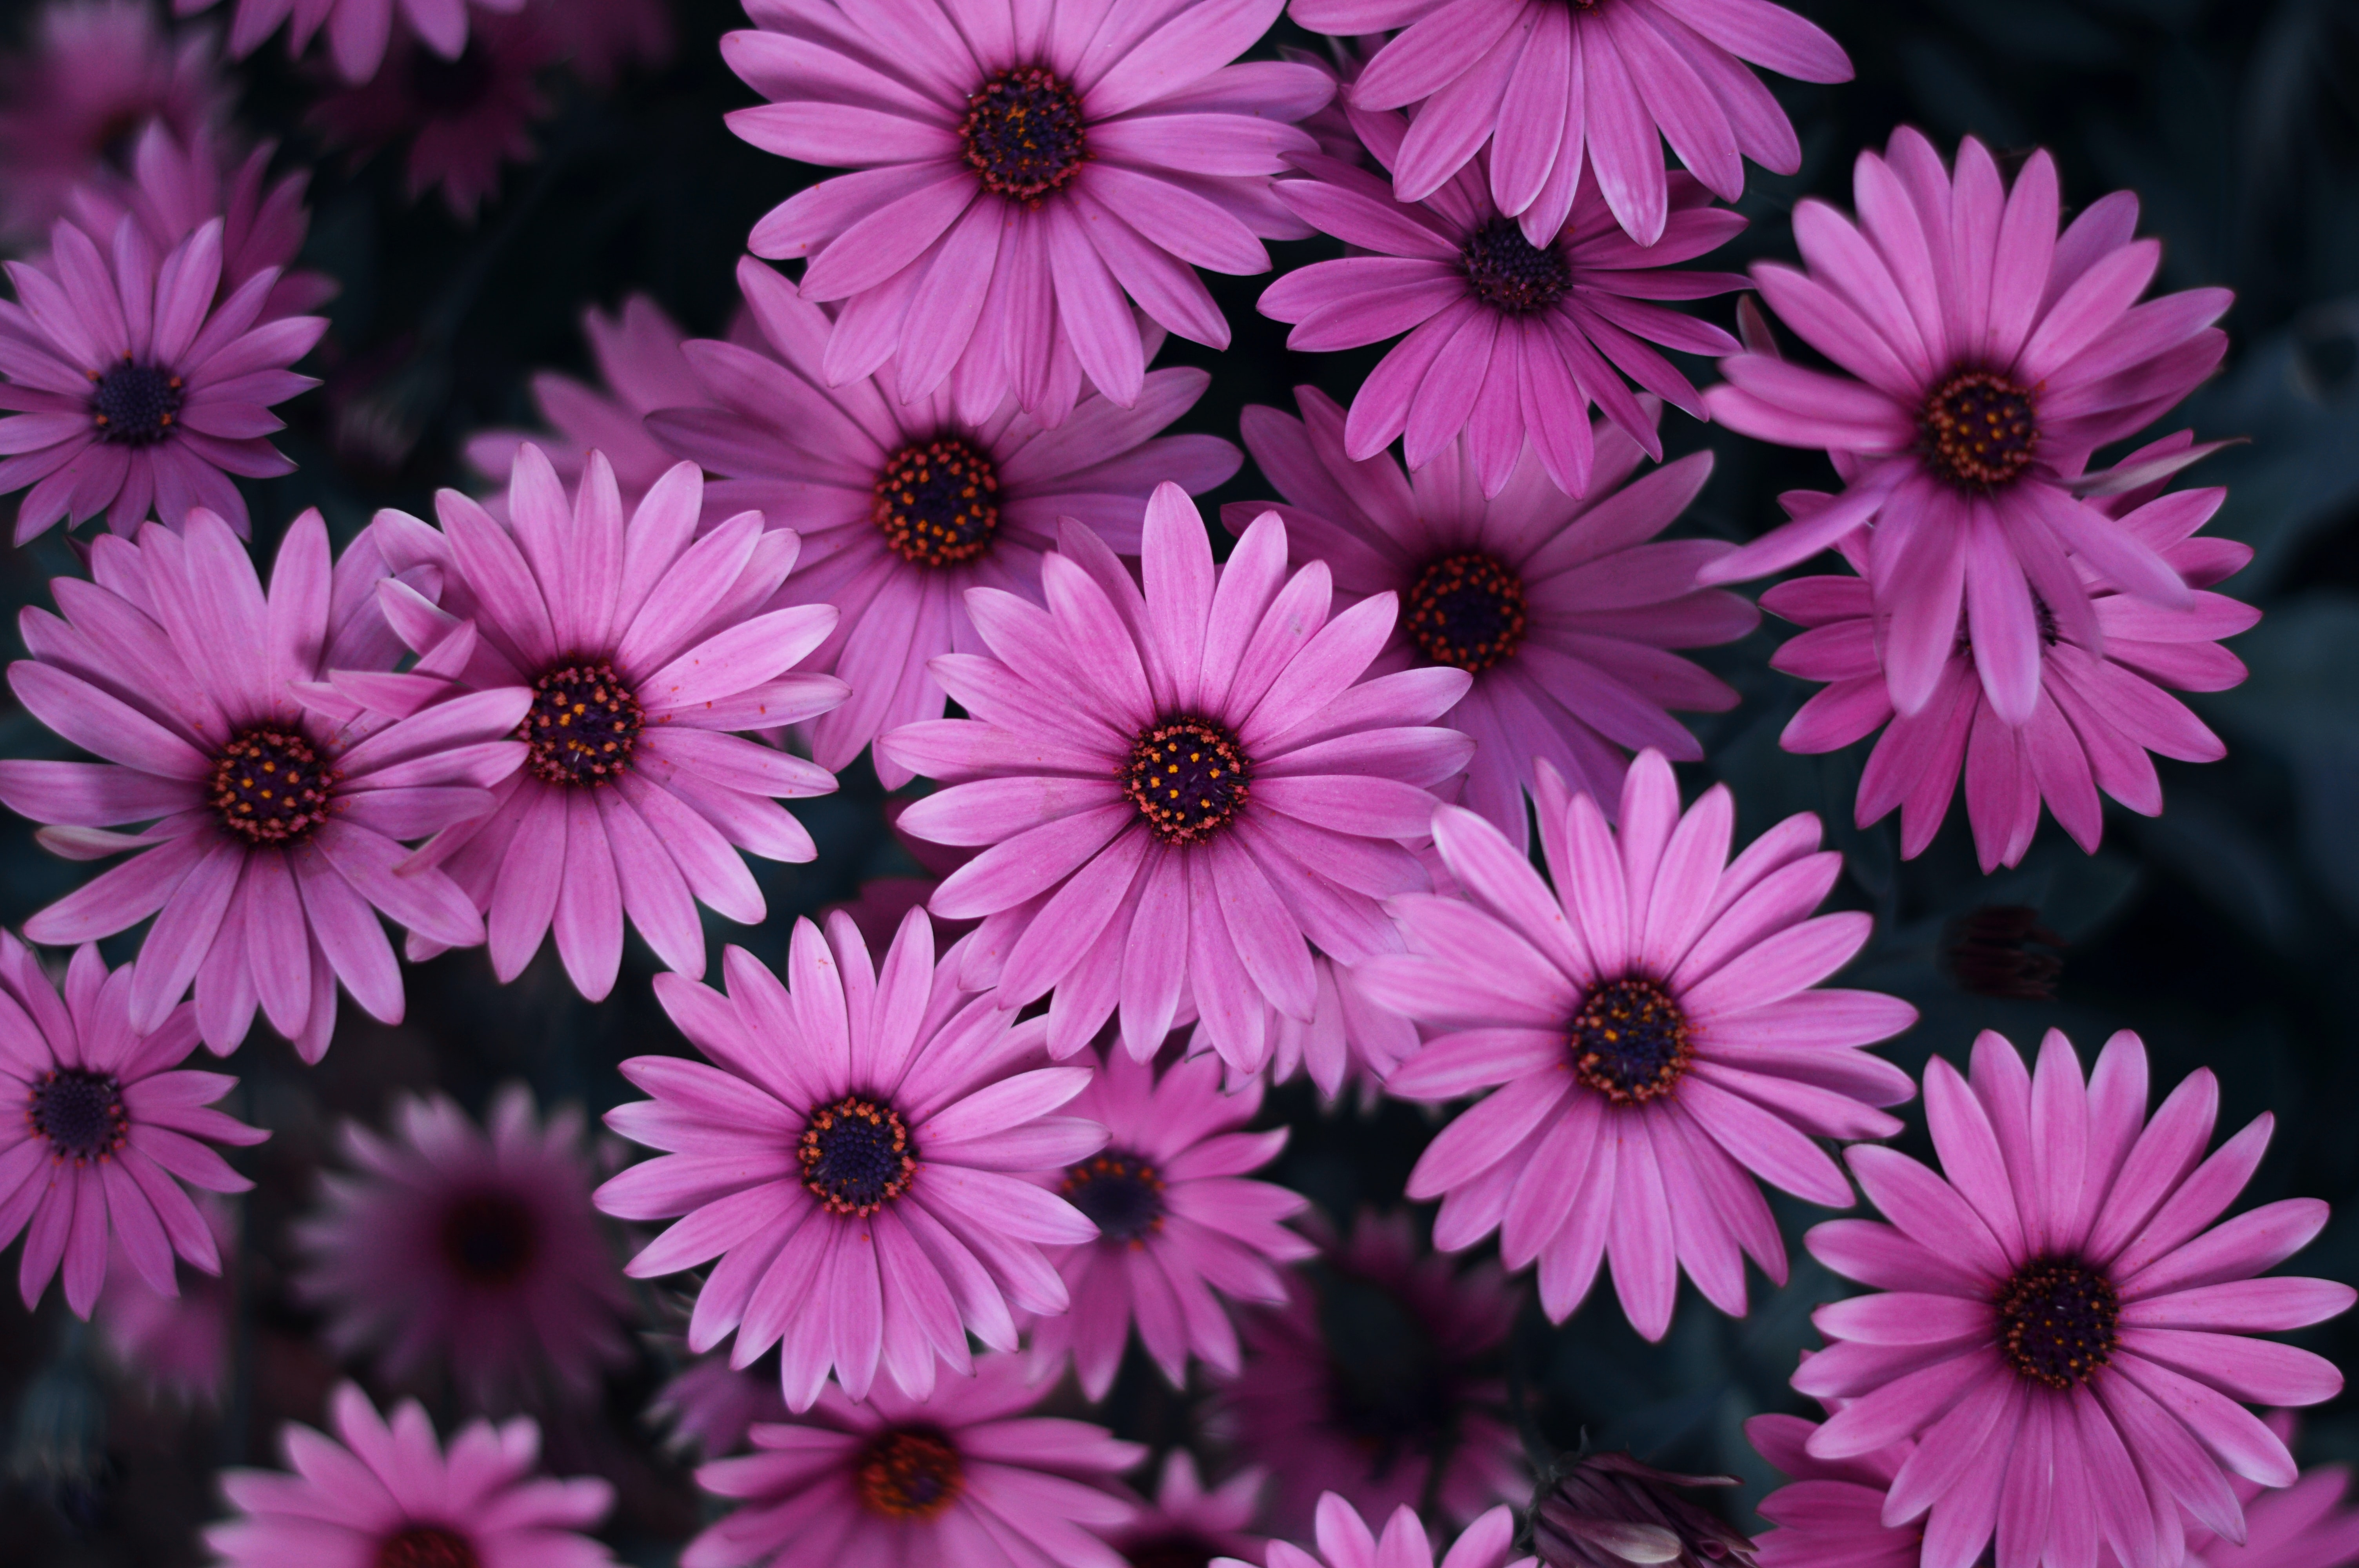 HD wallpaper, Pink Daisies, Spring, Bloom, Closeup, Floral Background, Blossom, Beautiful, 5K